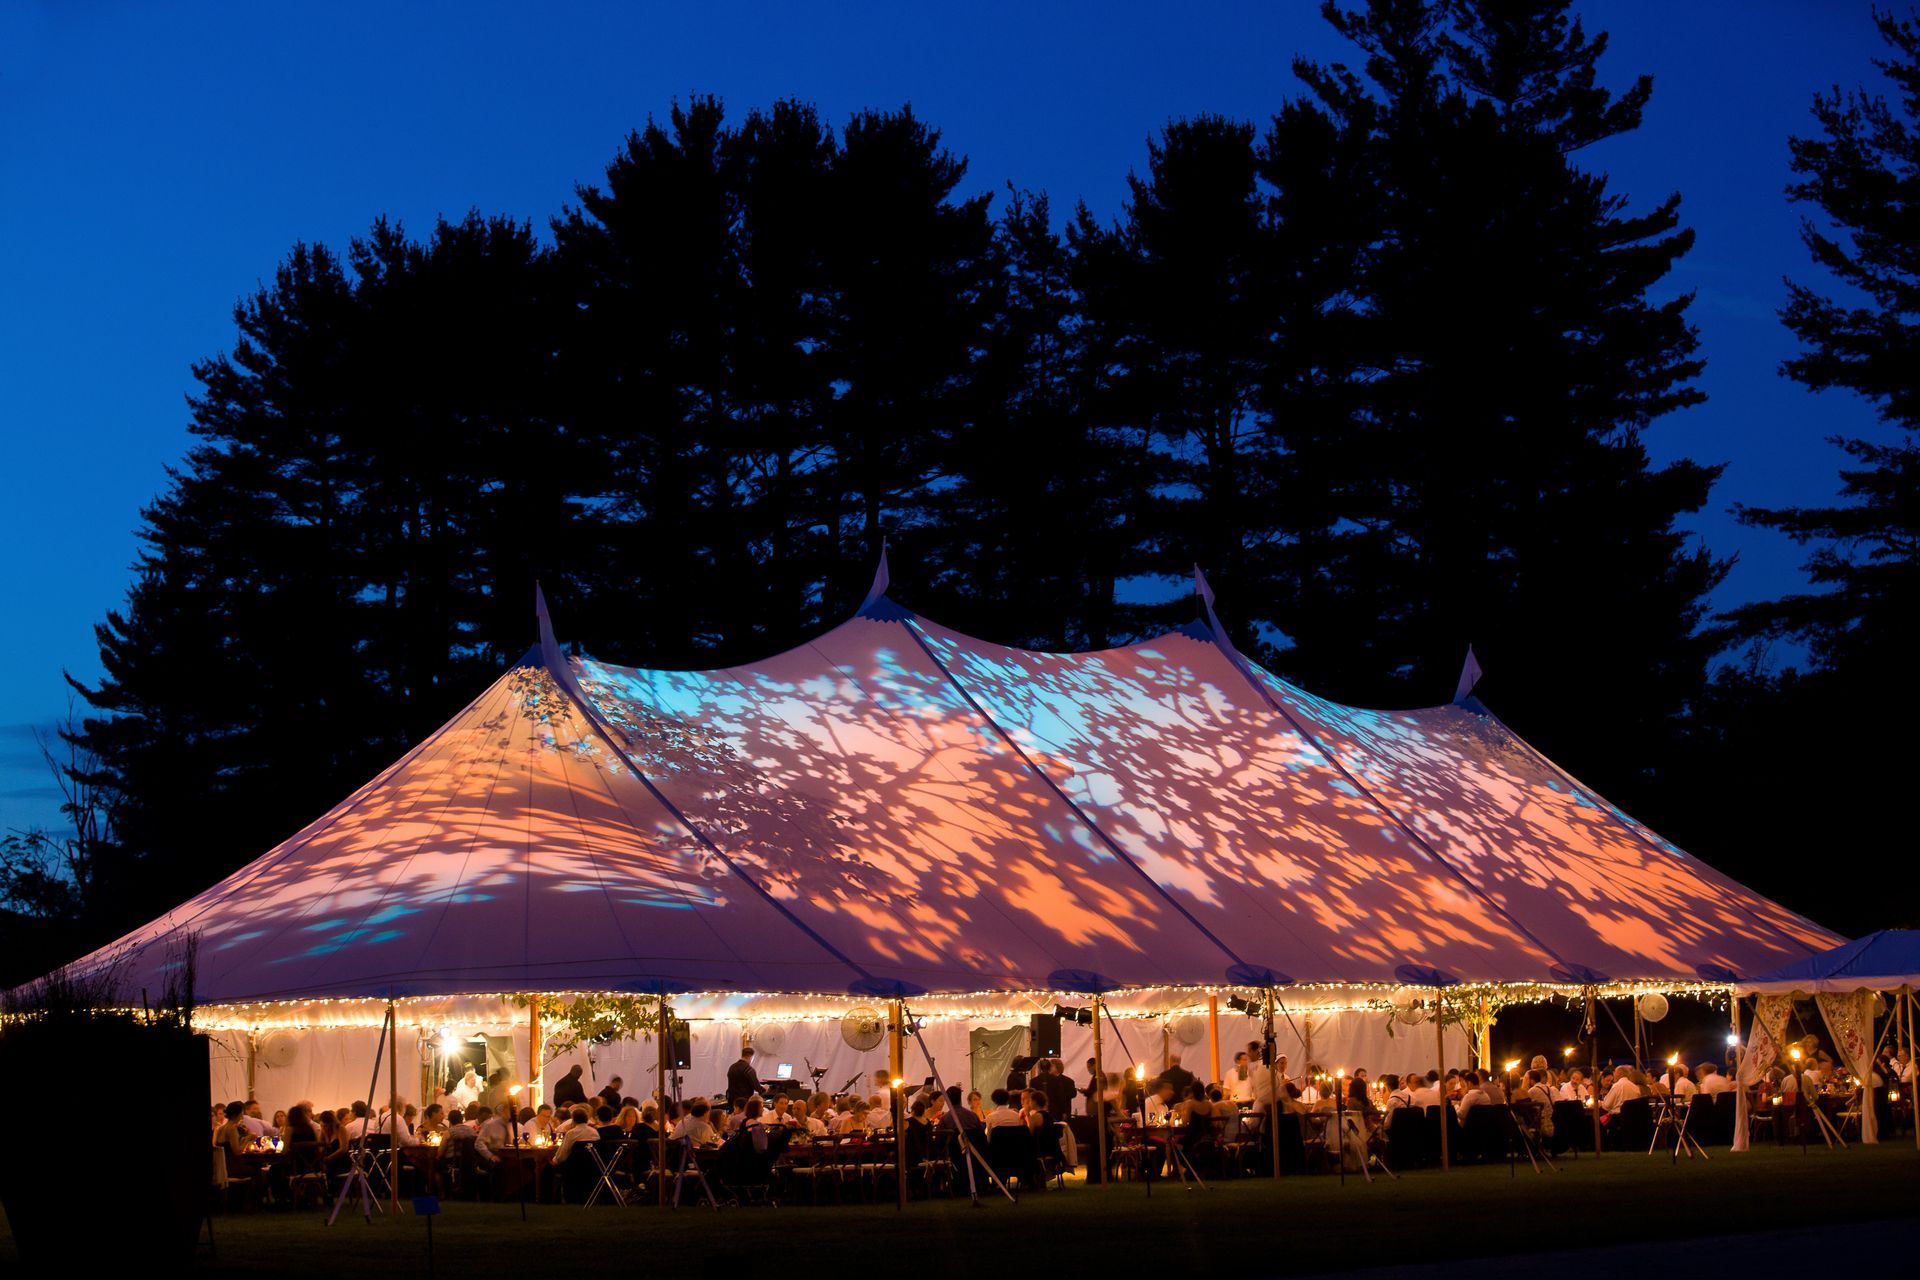 Wedding tent at night - Special event tent lit up from the inside with dark blue night time sky and trees.